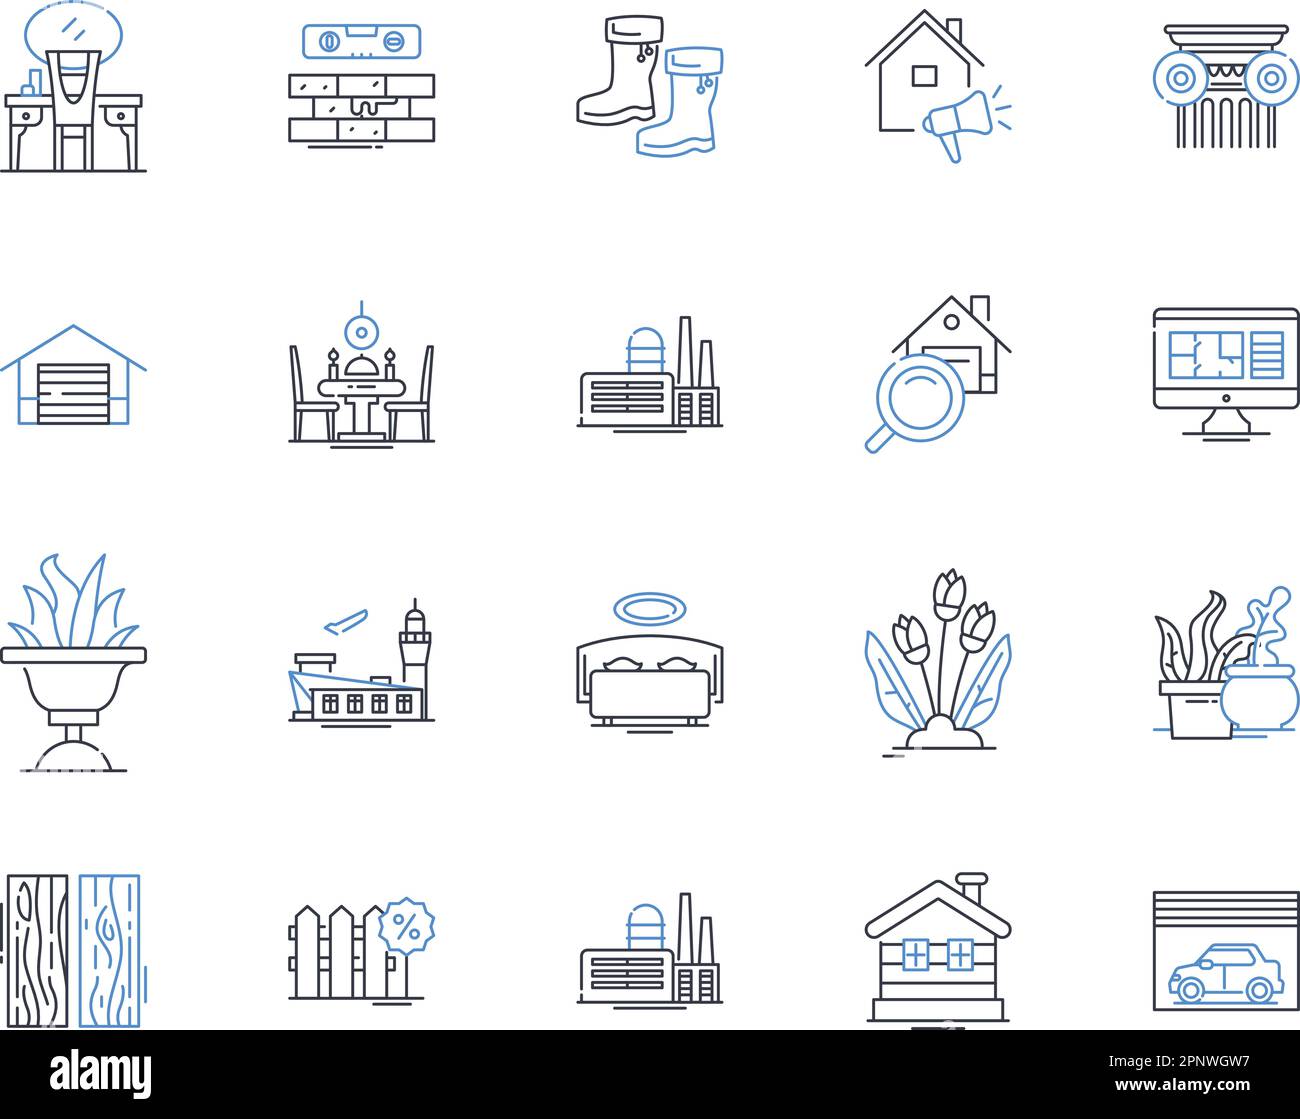 Condo and co-op line icons collection. Ownership, Association, Amenities, Maintenance, Rules, Equity, Board vector and linear illustration. Resale Stock Vector